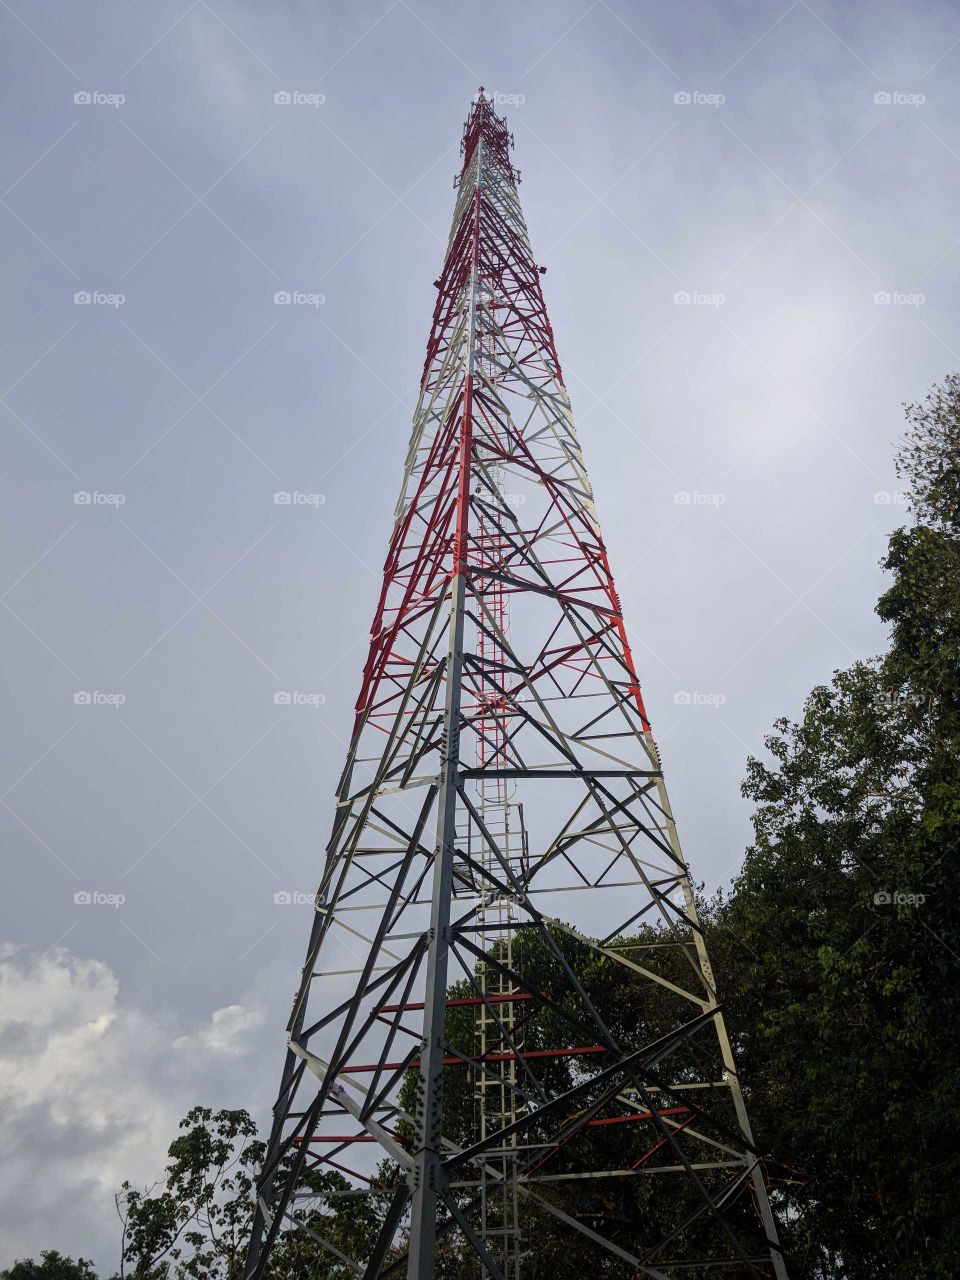 a tall cell tower in the Asian African style. the green wilderness and the blue cloudy skies also behind.